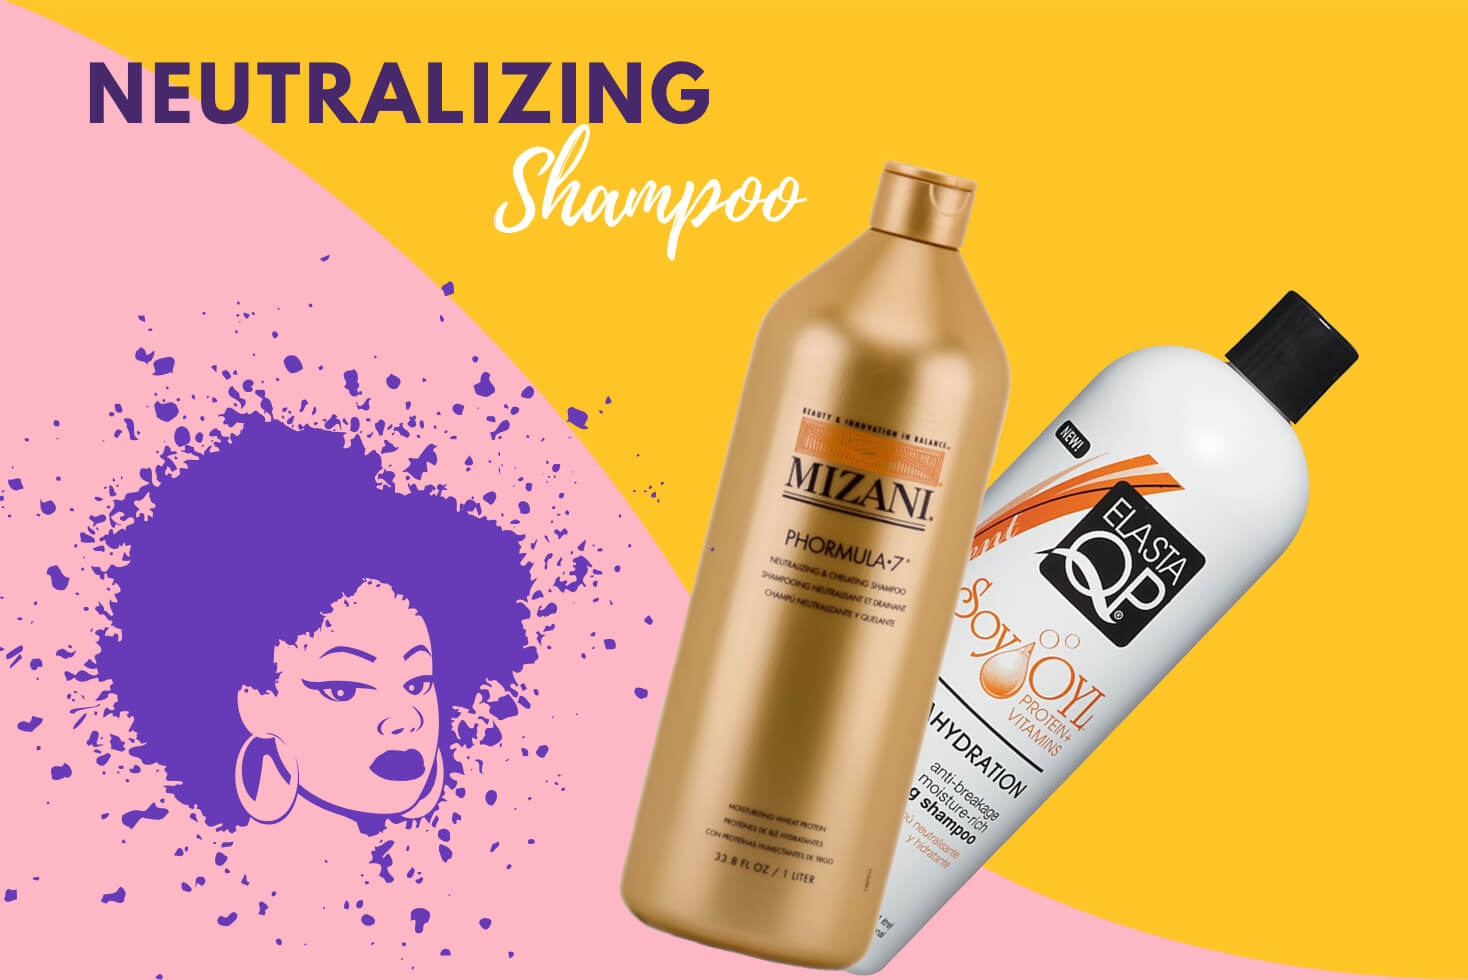 What Is a Neutralizing Shampoo and What Does It Do?